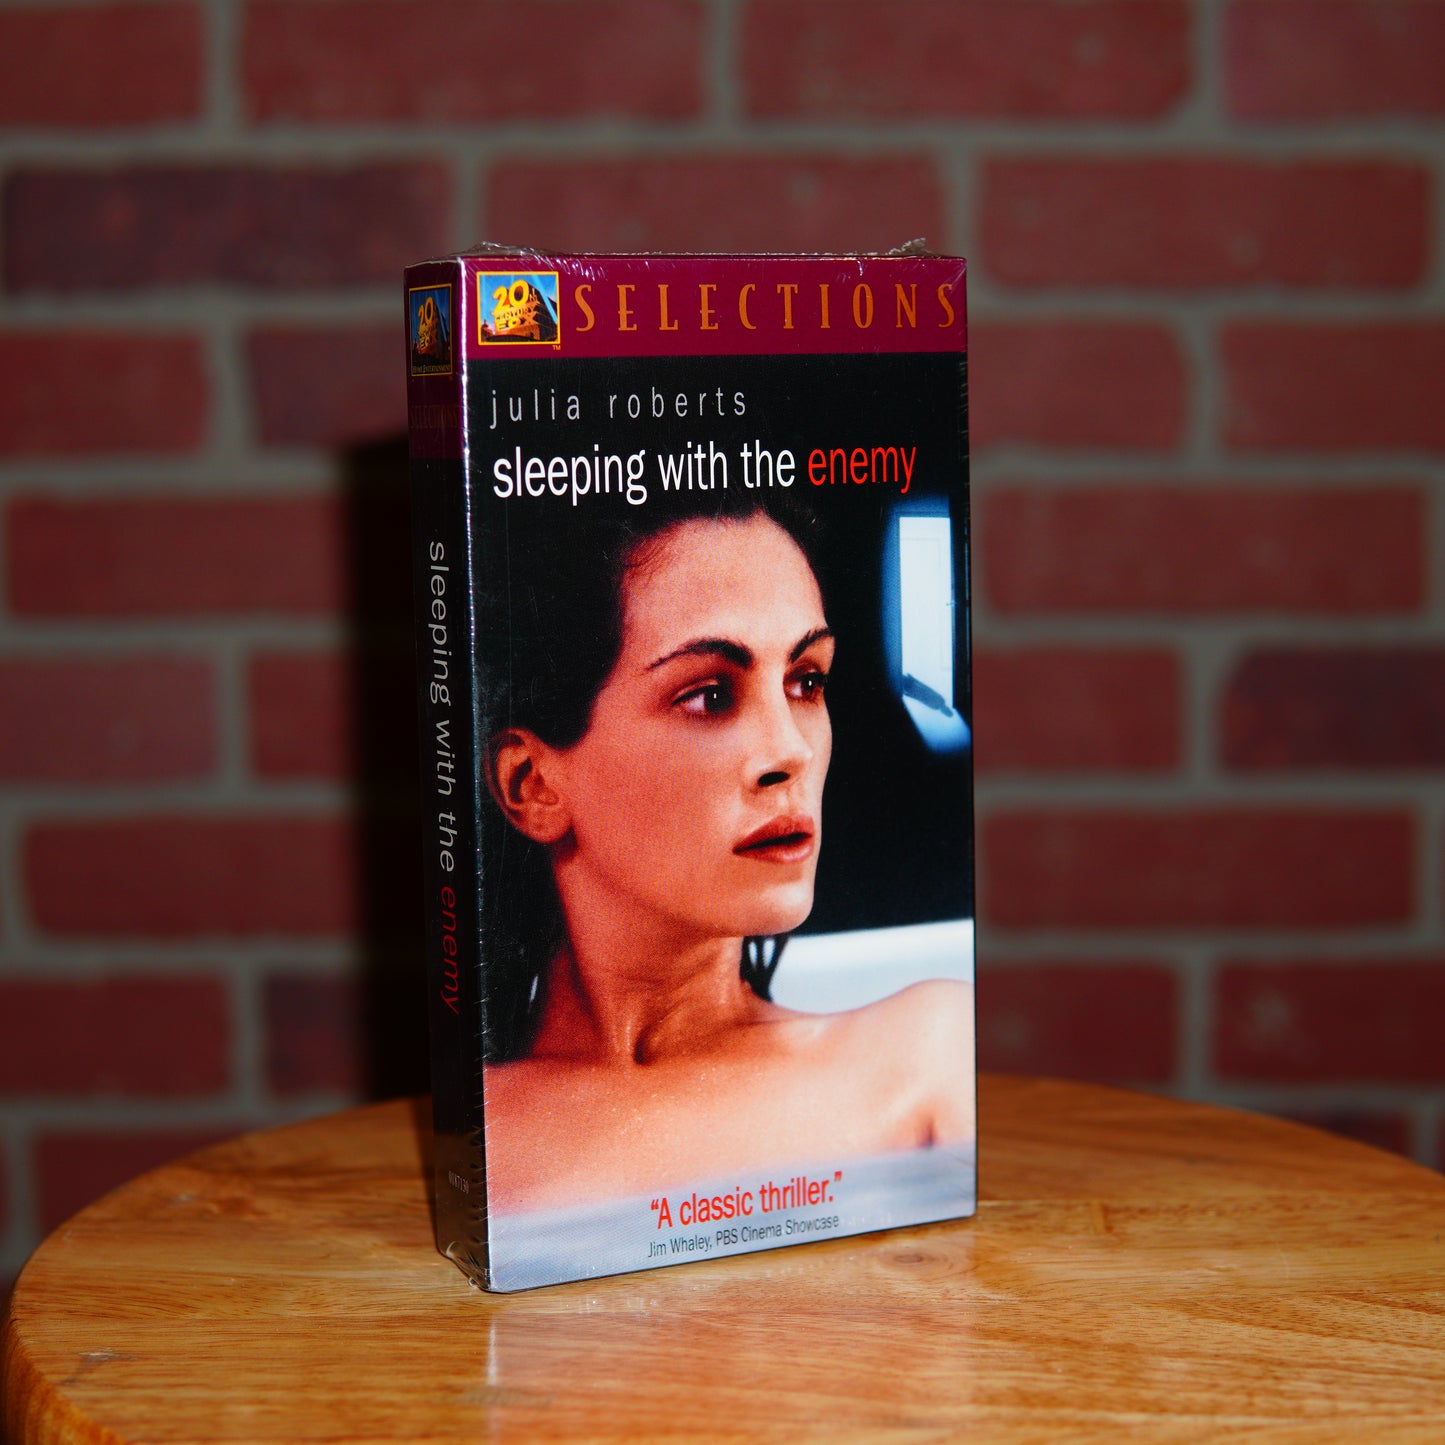 DS VTG Sleeping With The Enemy Movie VHS